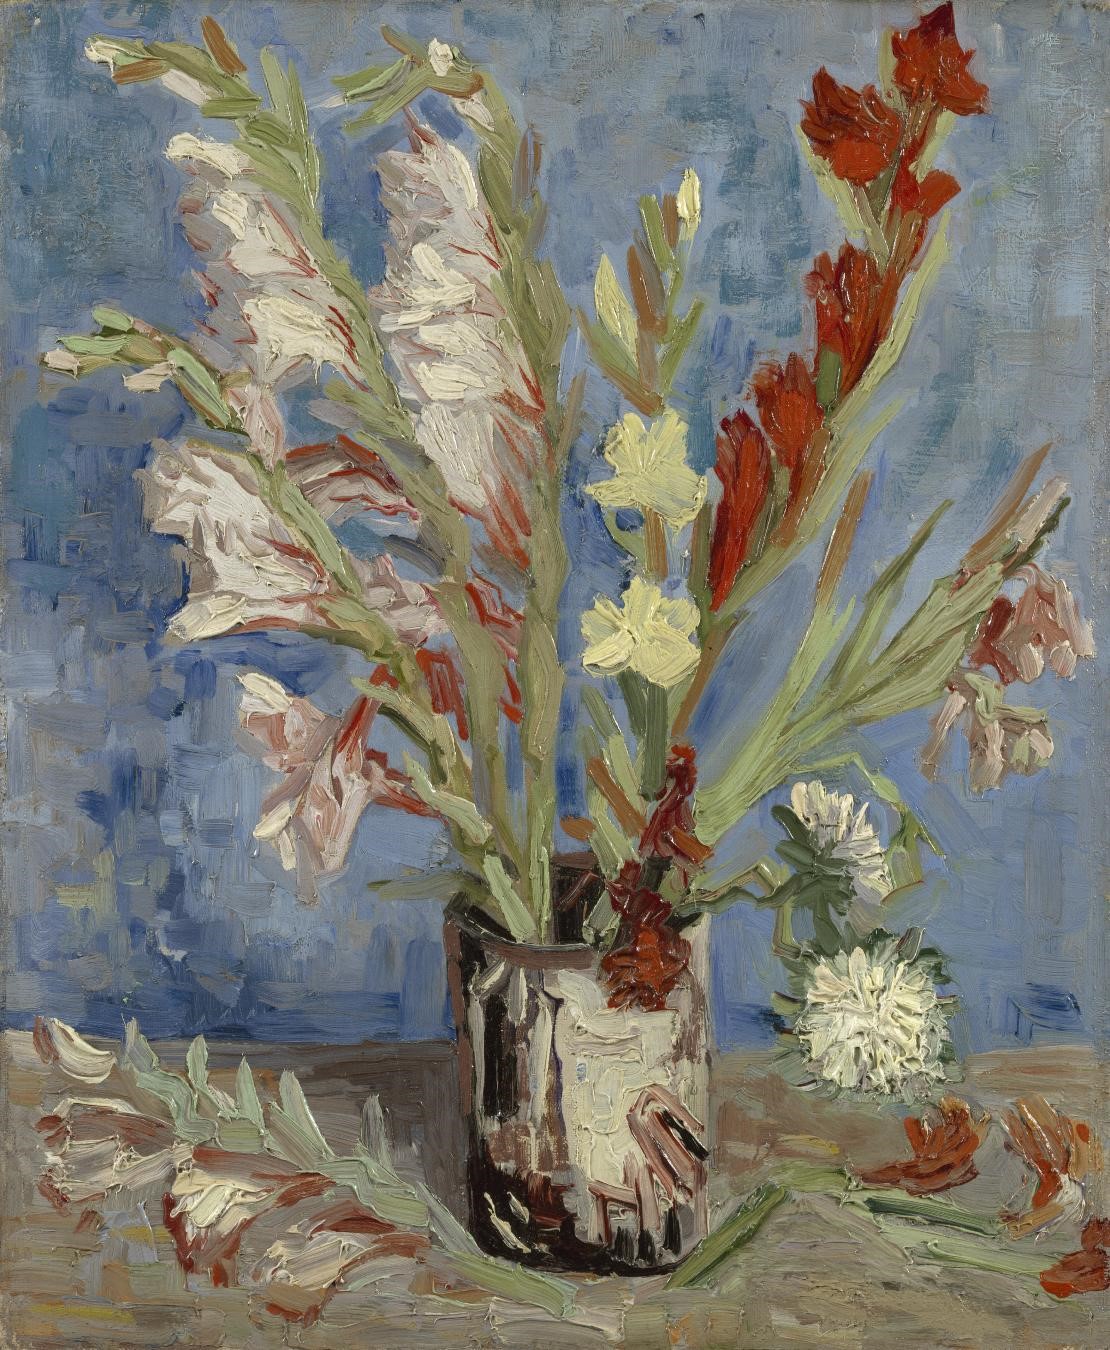 Vincent van Gogh, Vase with Gladioli and Chinese Asters, August–September 1886, oil on canvas, Van Gogh Museum, Amsterdam (Vincent van Gogh Foundation).